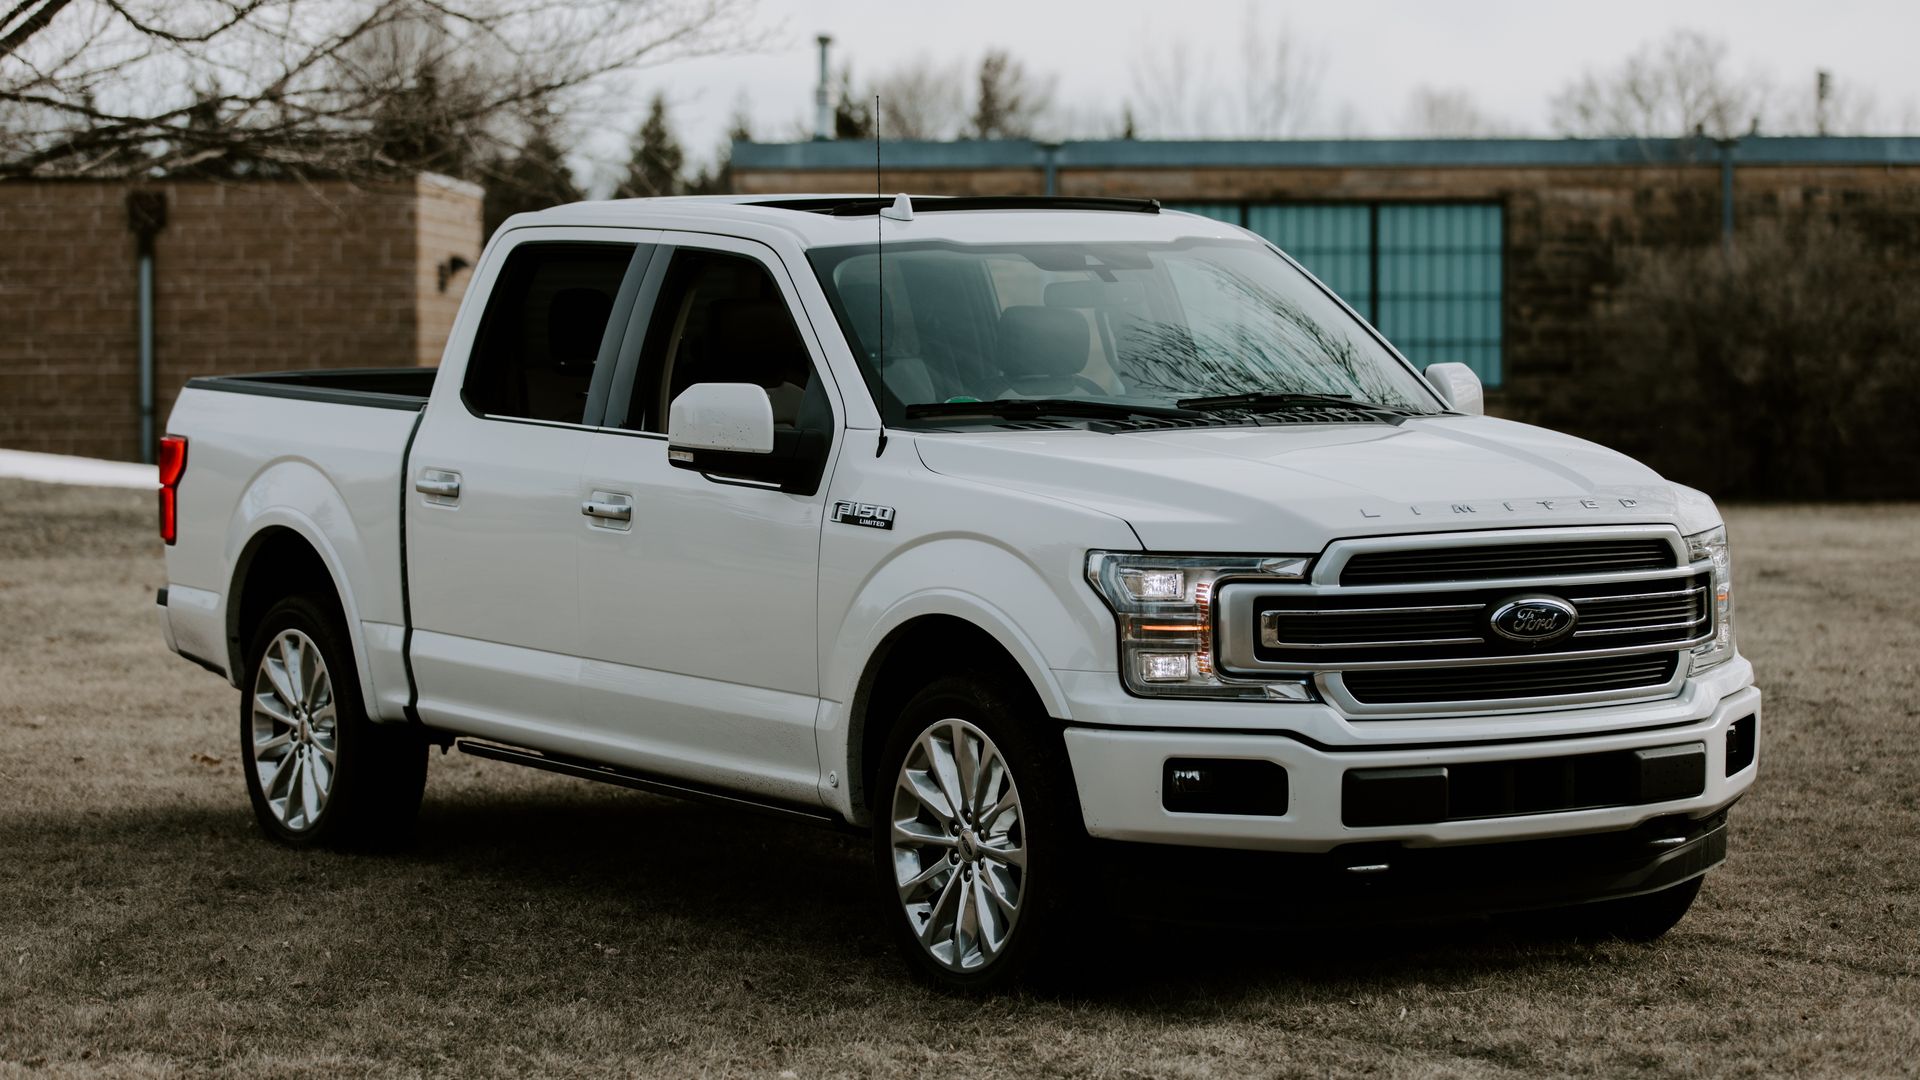 Three Things To Know About Lane Keeping On The 2019 Ford F 150 Techradar